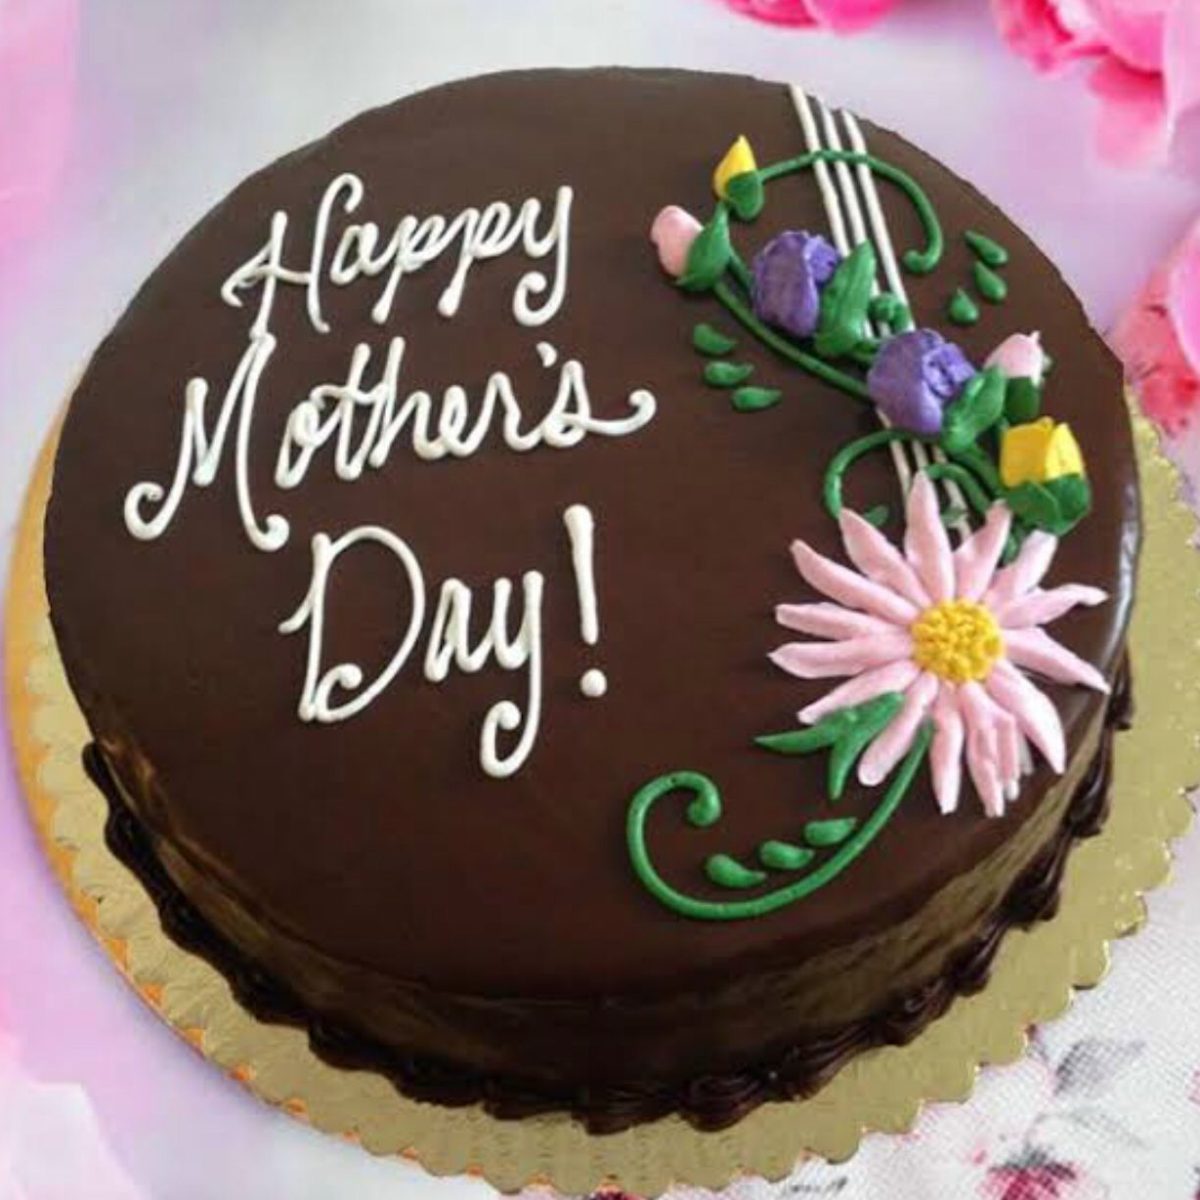 Delicious Chocolate Cake For mamma's Day